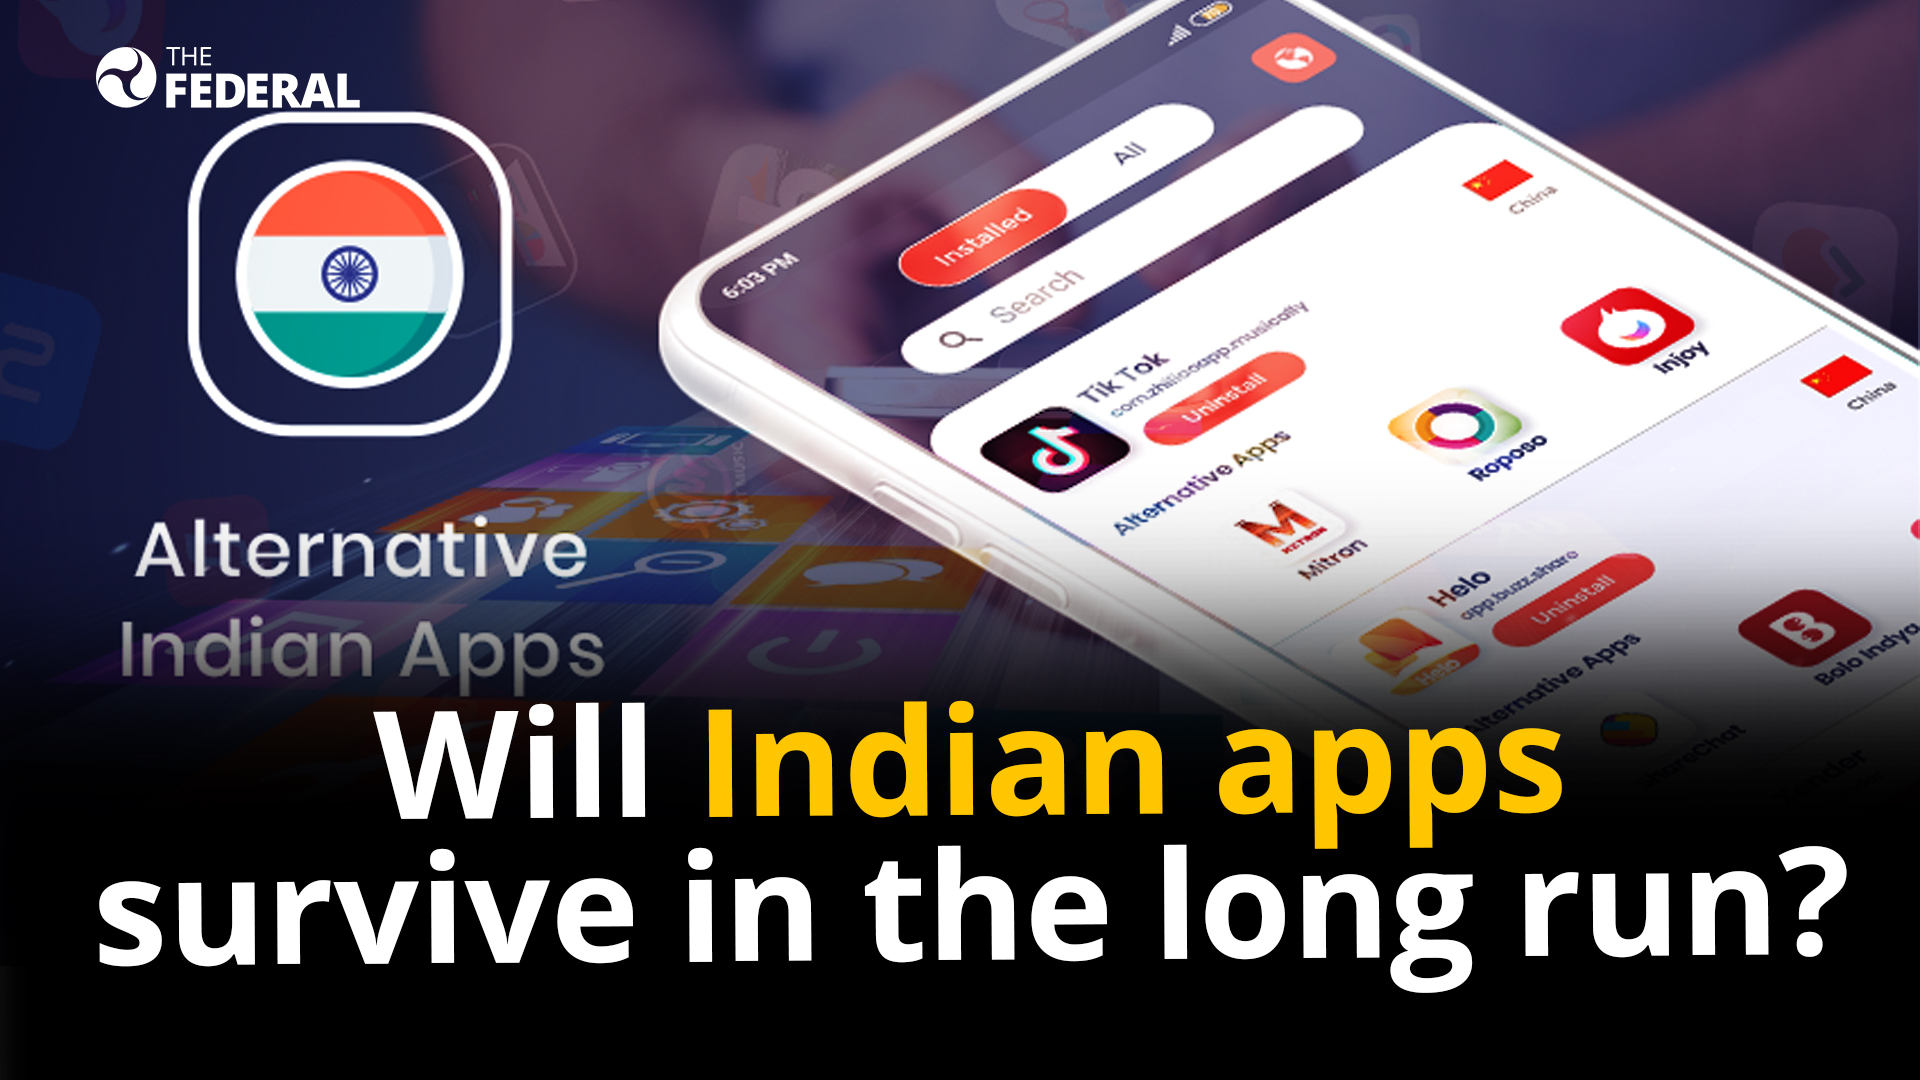 Indian apps see huge surge in downloads, but will they make it big?